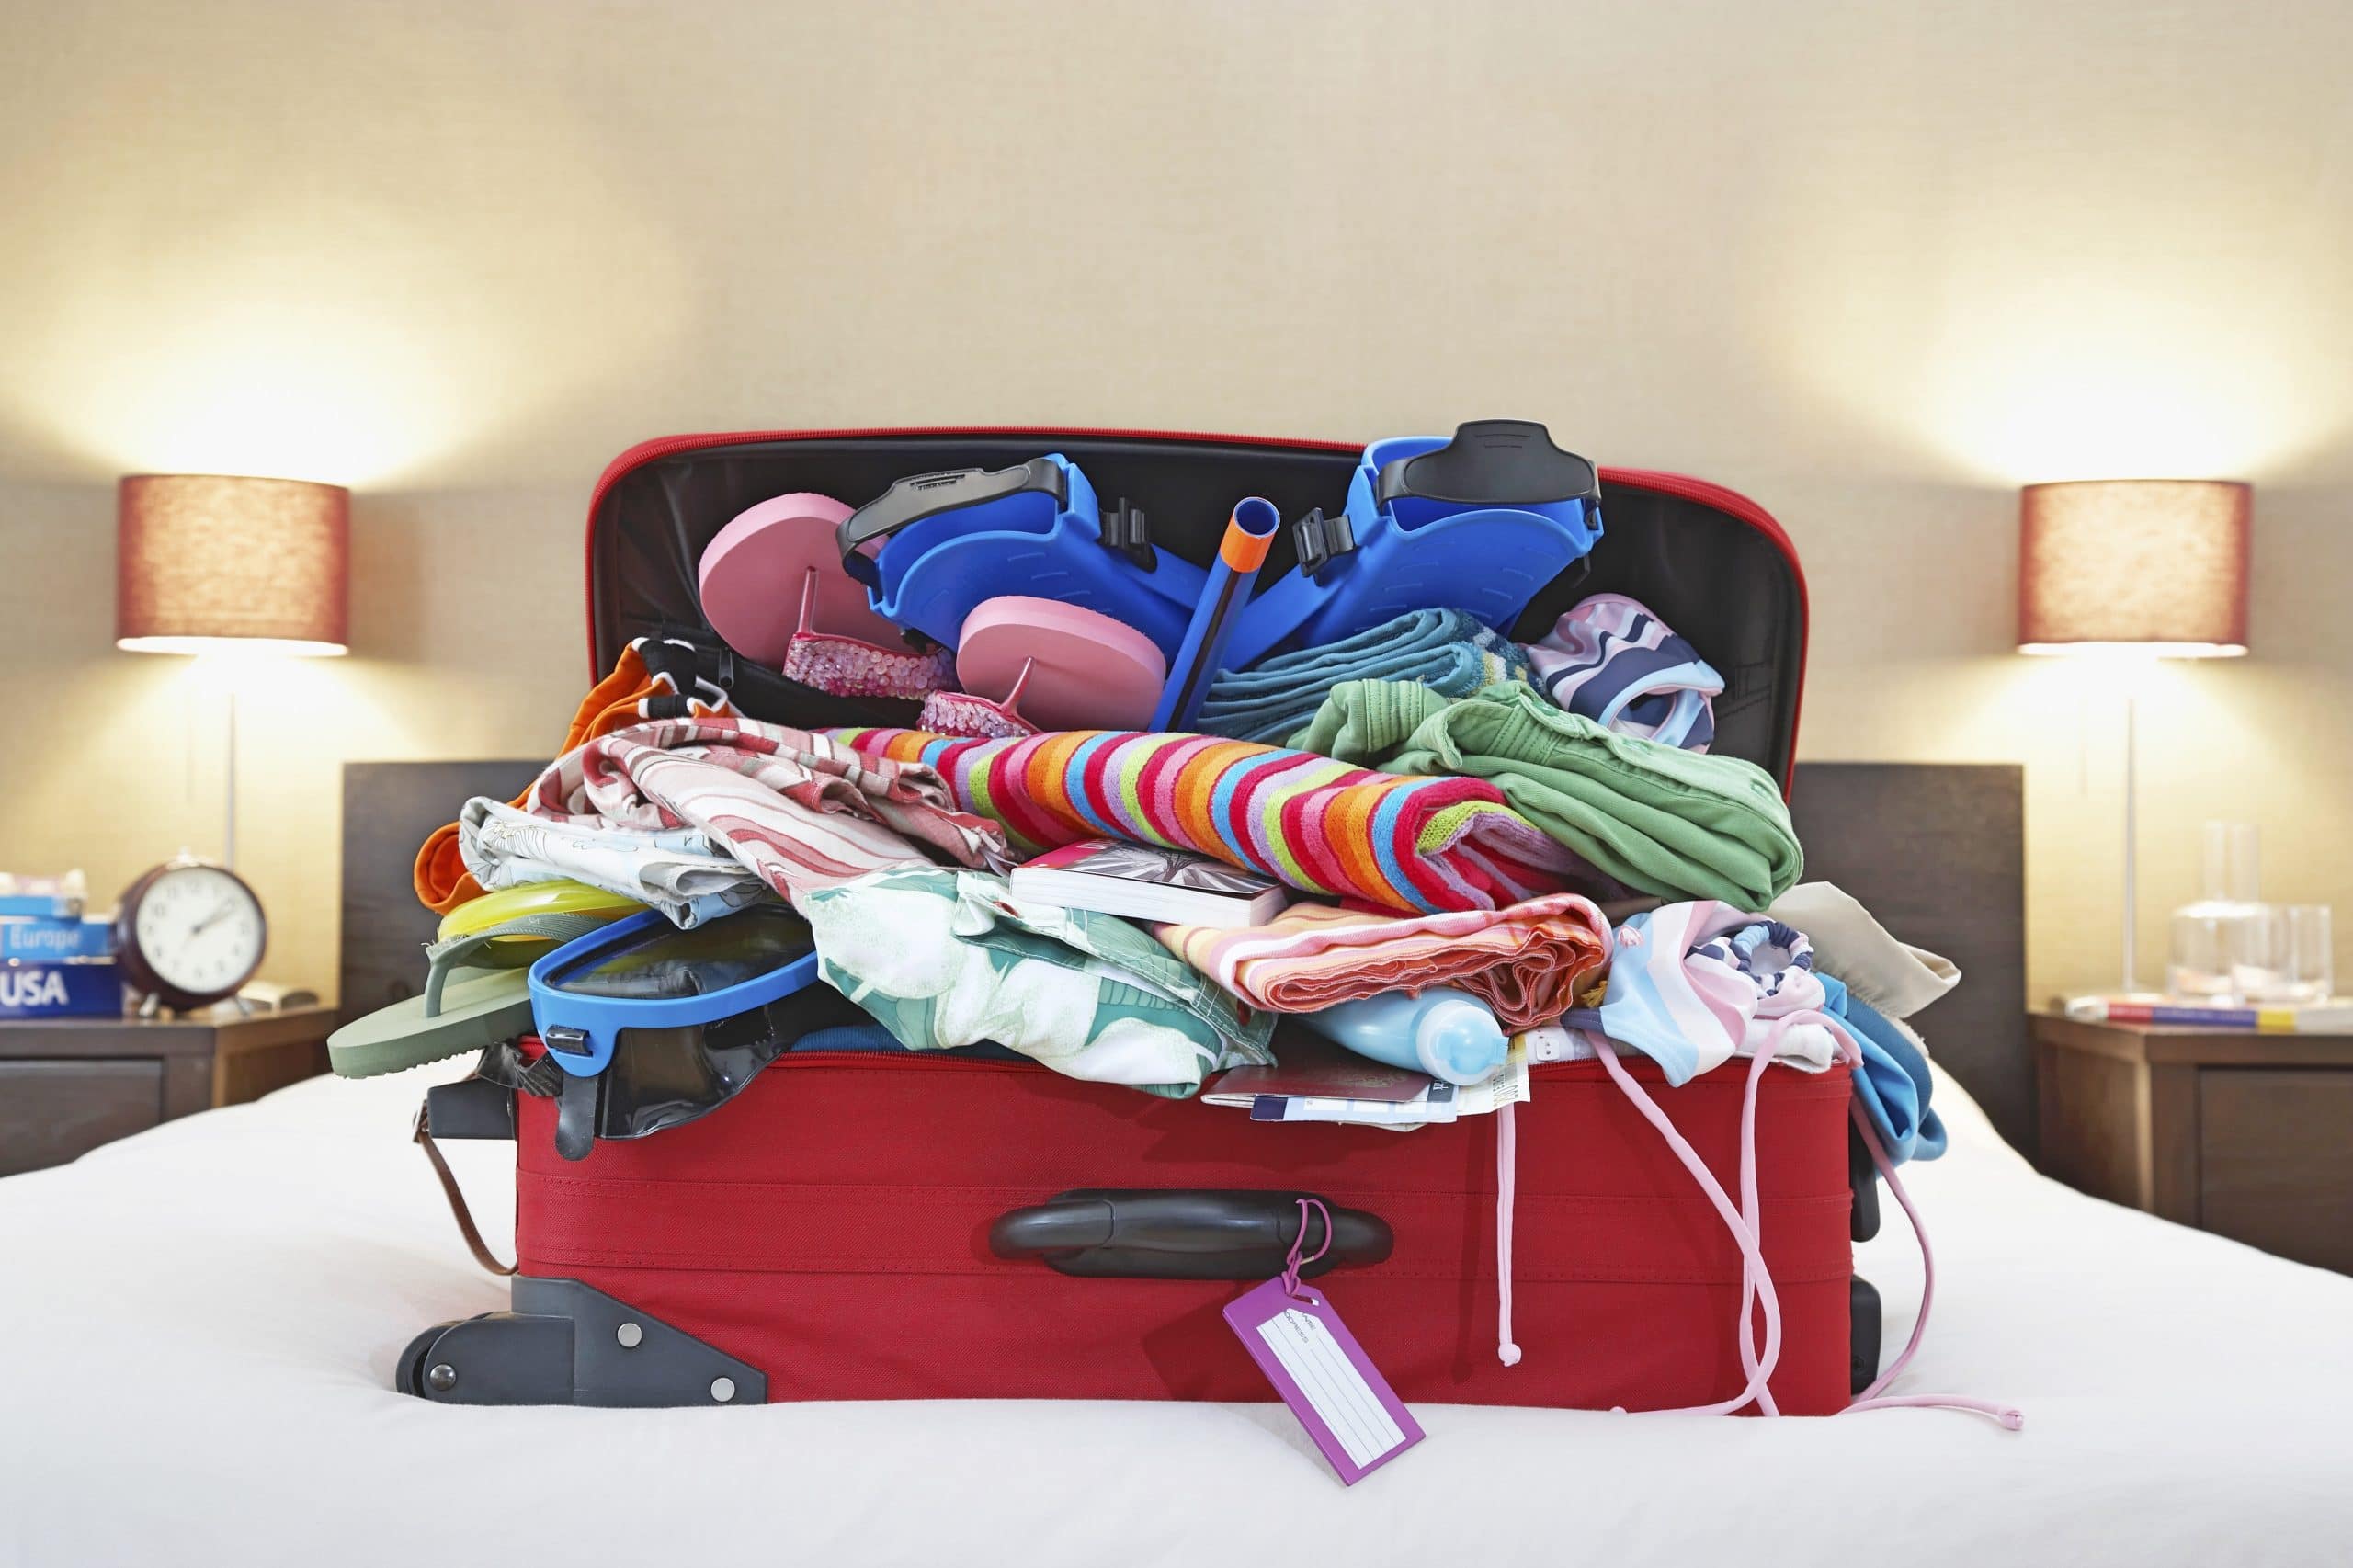 Overflowing suitcase filled with summer holiday clothes